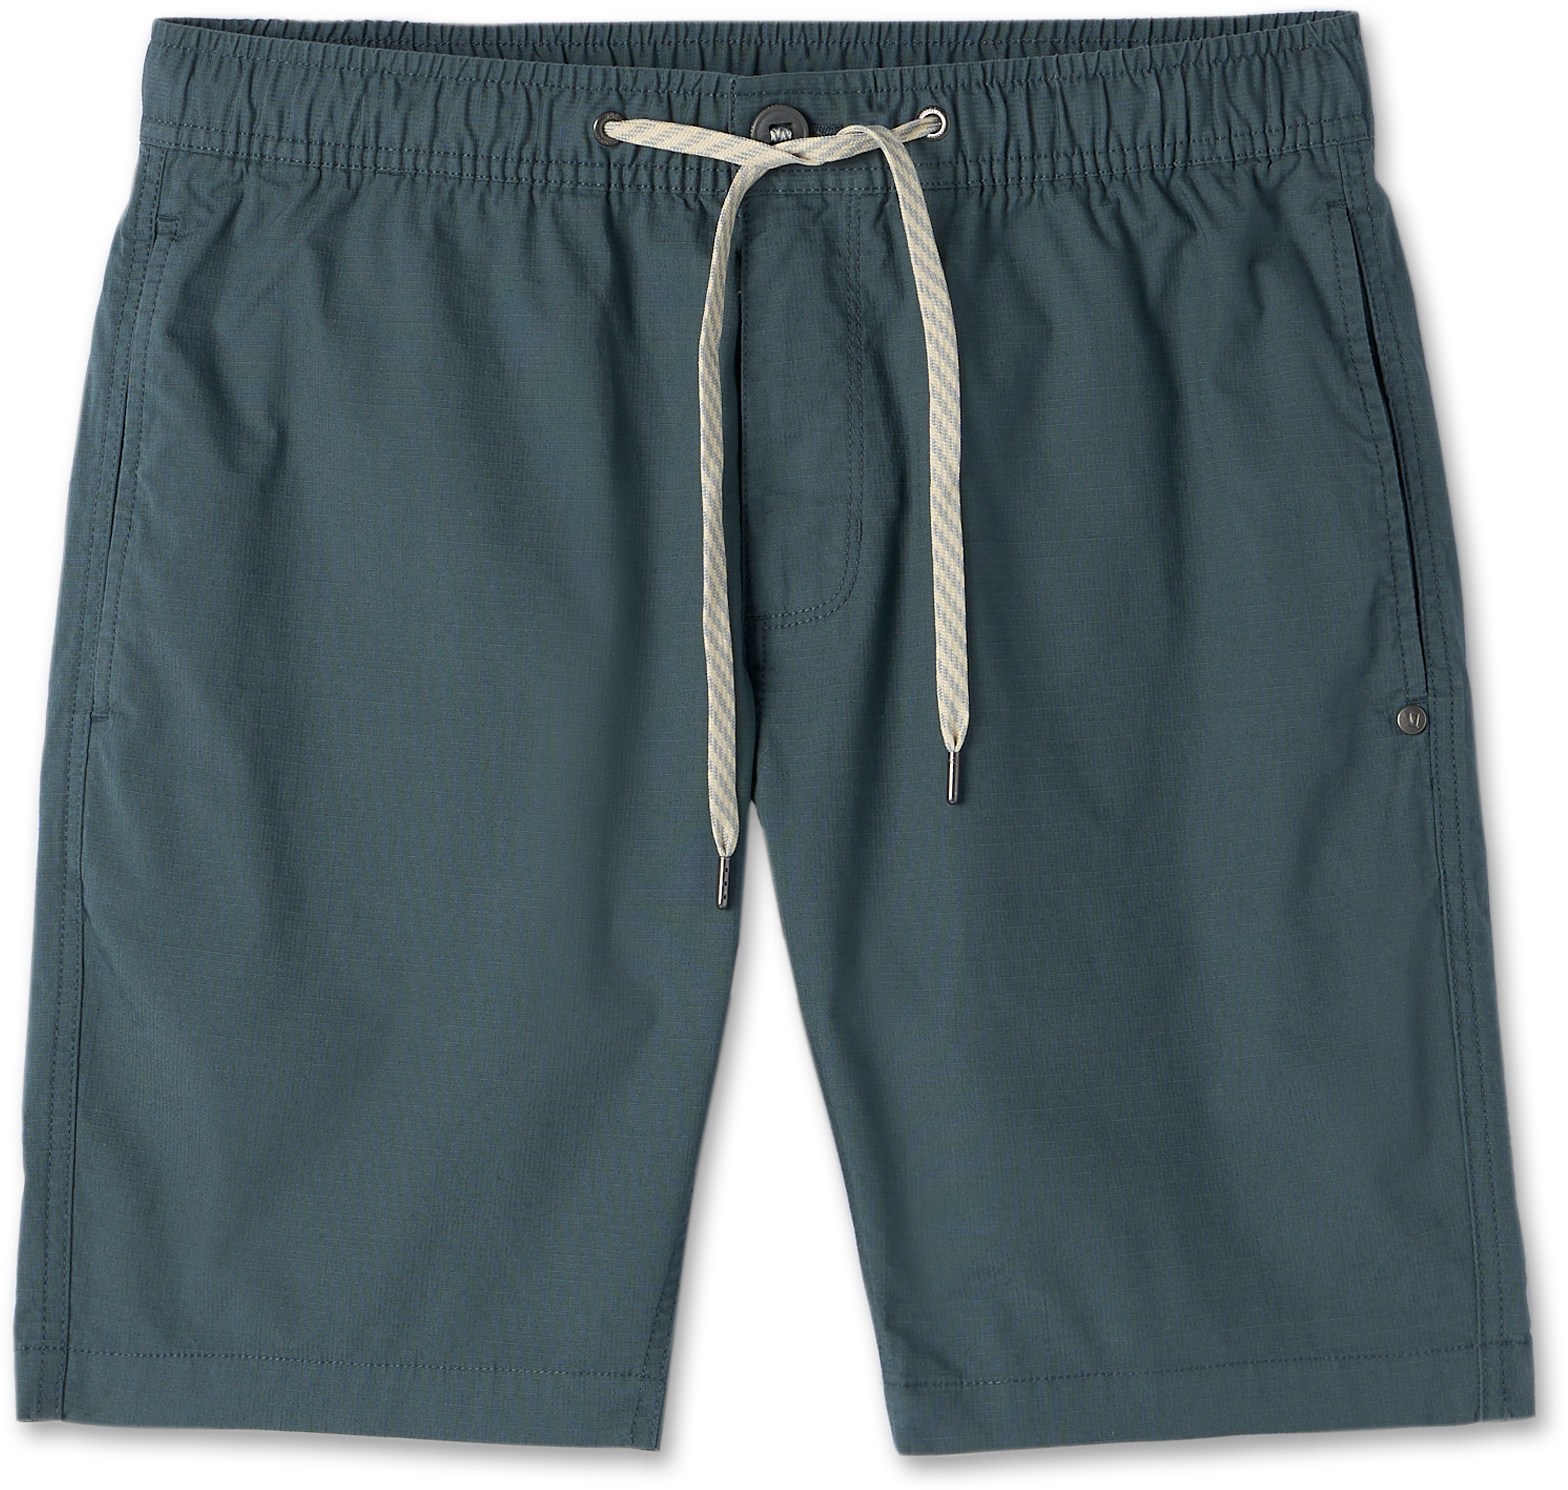 High-Quality Lined Shorts for Running, Hiking & Outdoor Training